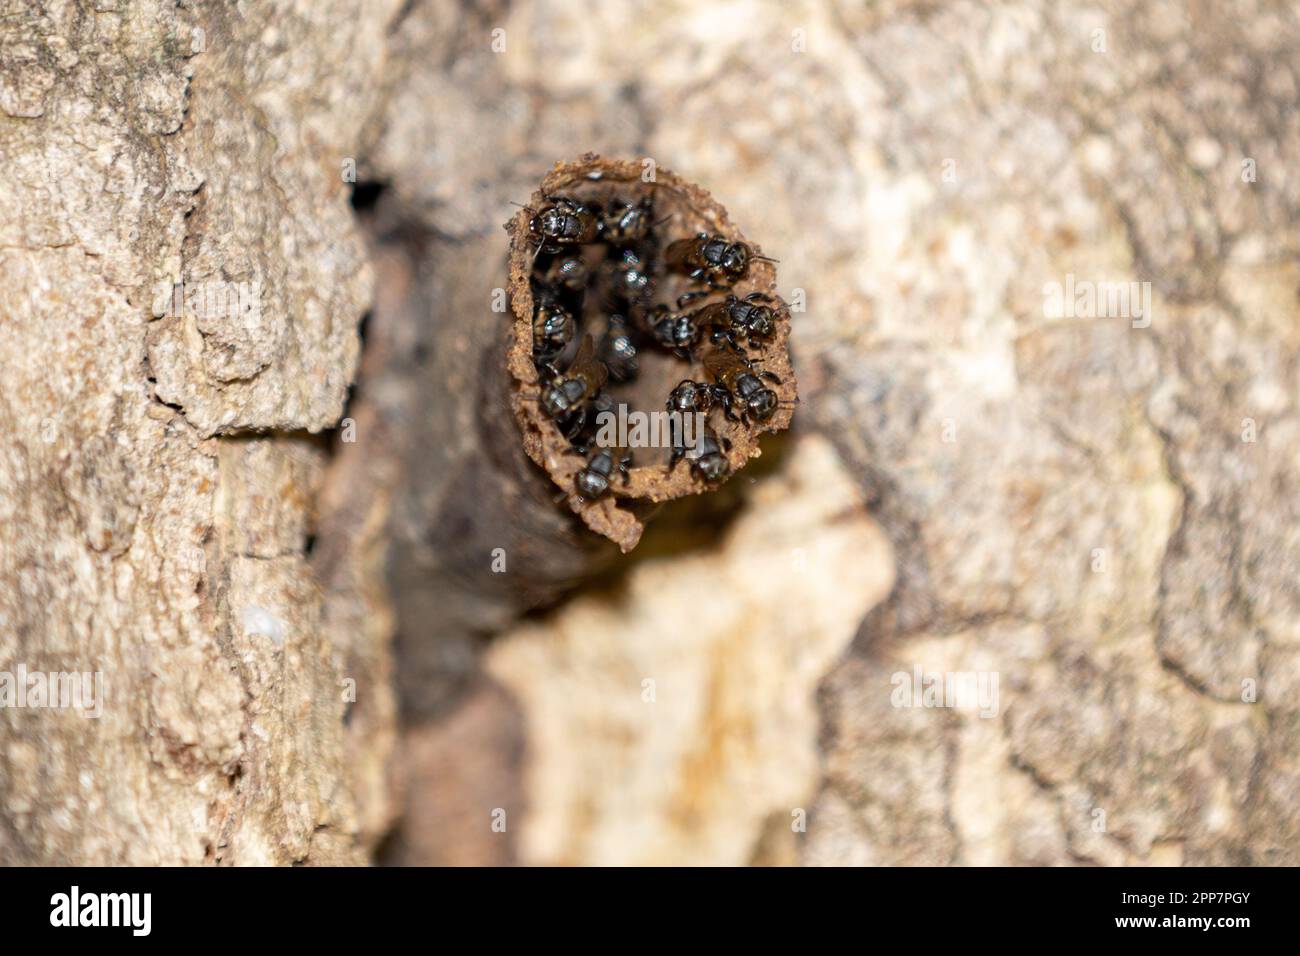 Stingless bees native to Brazilian forests. Nest in the tree trunk Stock Photo